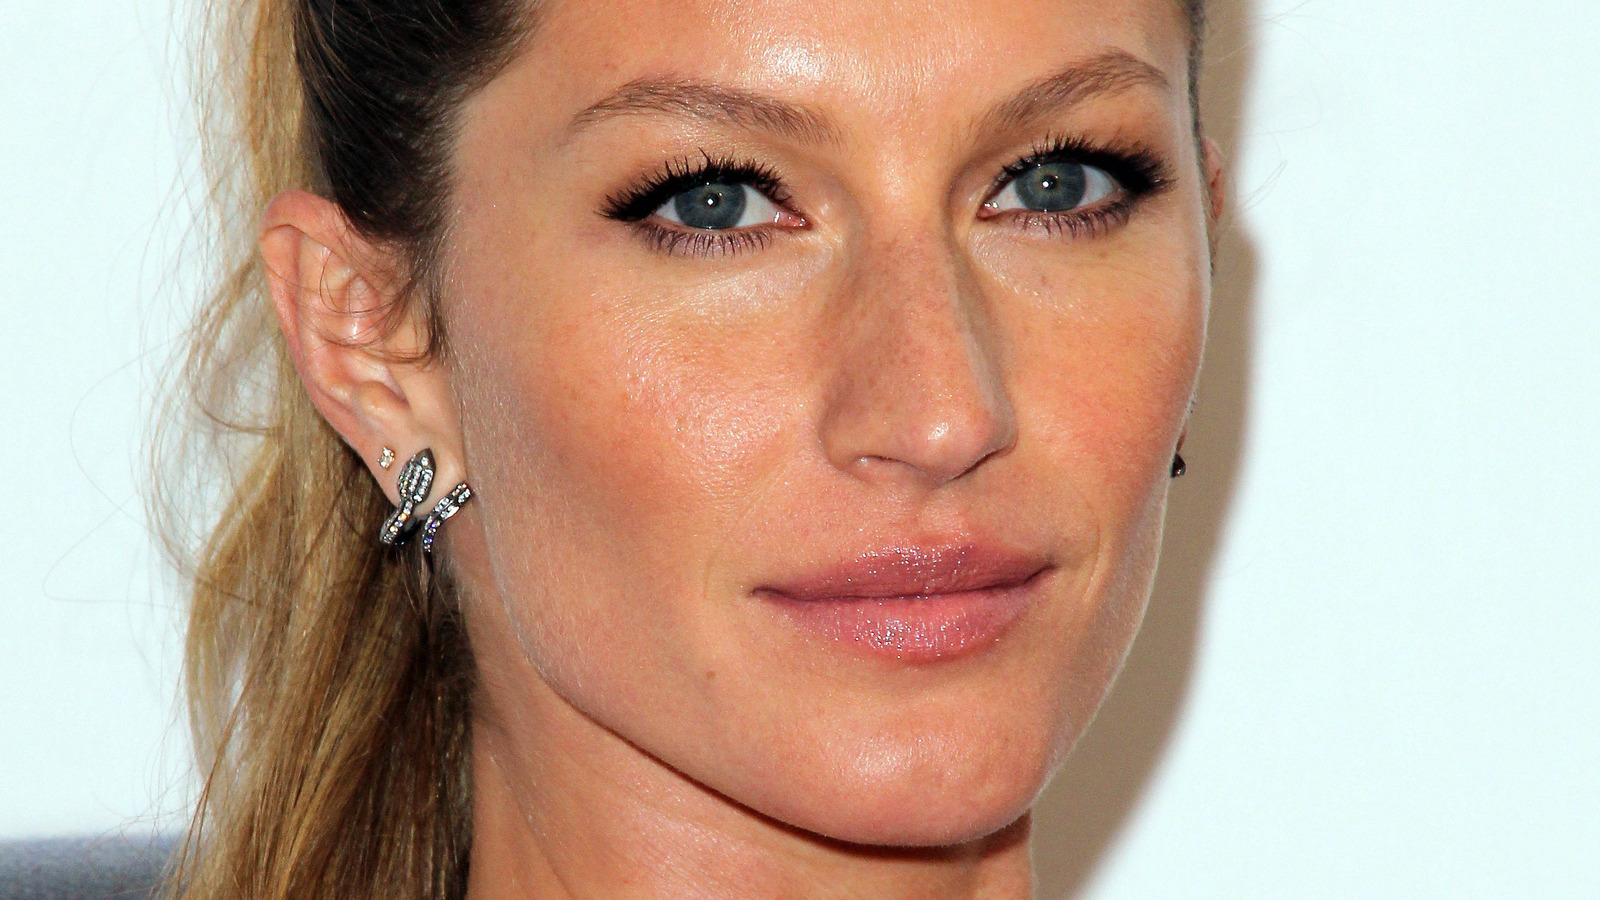 Tom Brady And Gisele Bündchen’s Rumored Issues Might We Worse Than We Thought